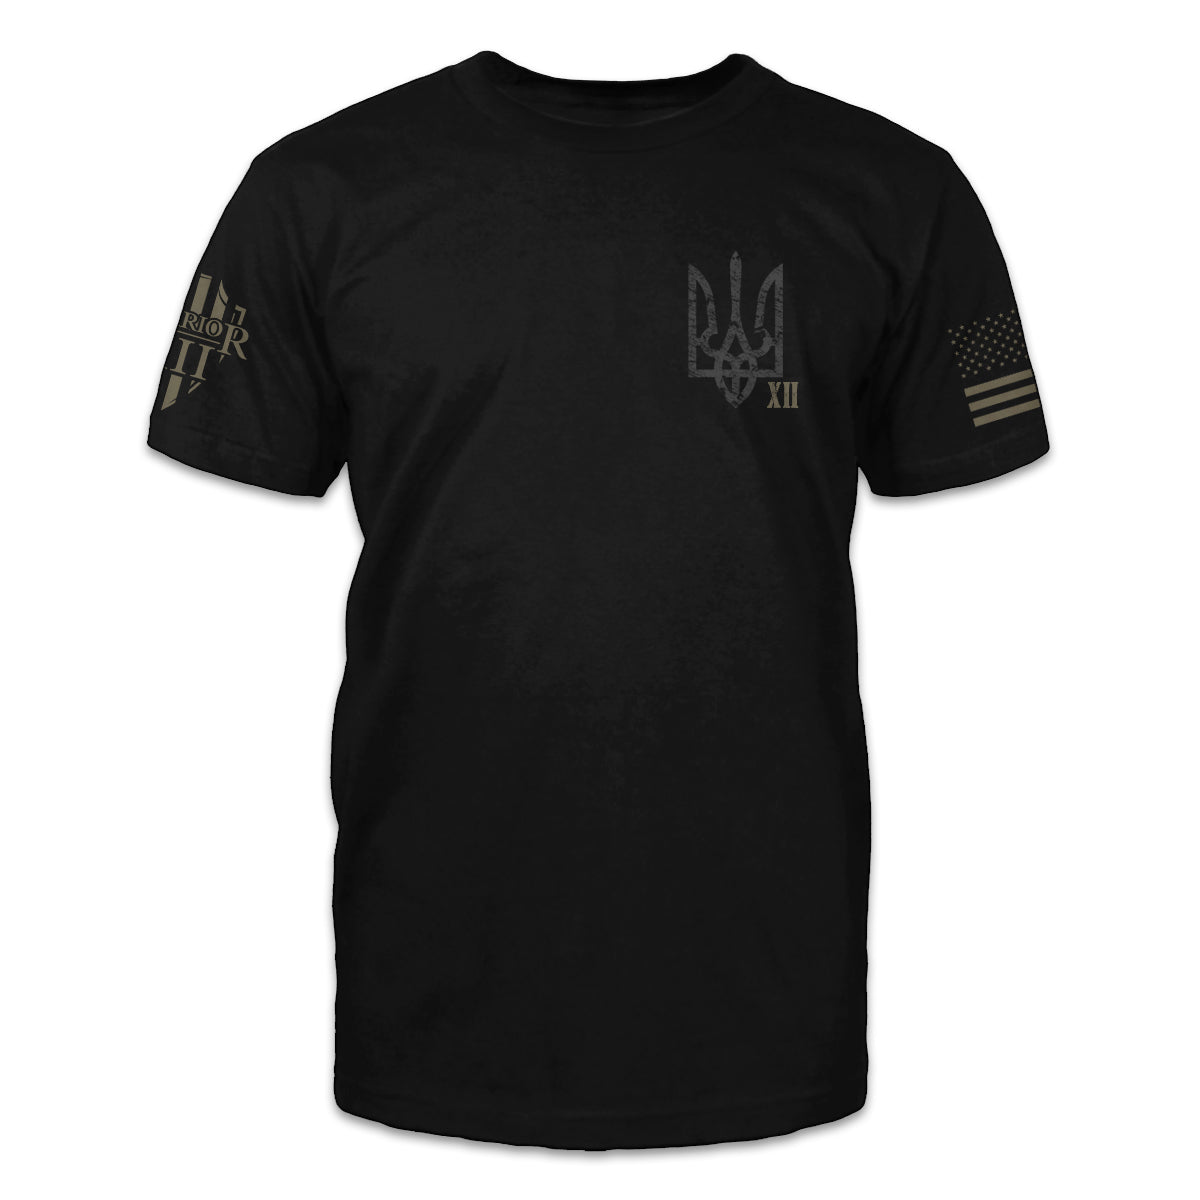 A black t-shirt with the Cossack symbol printed on the front of the shirt.